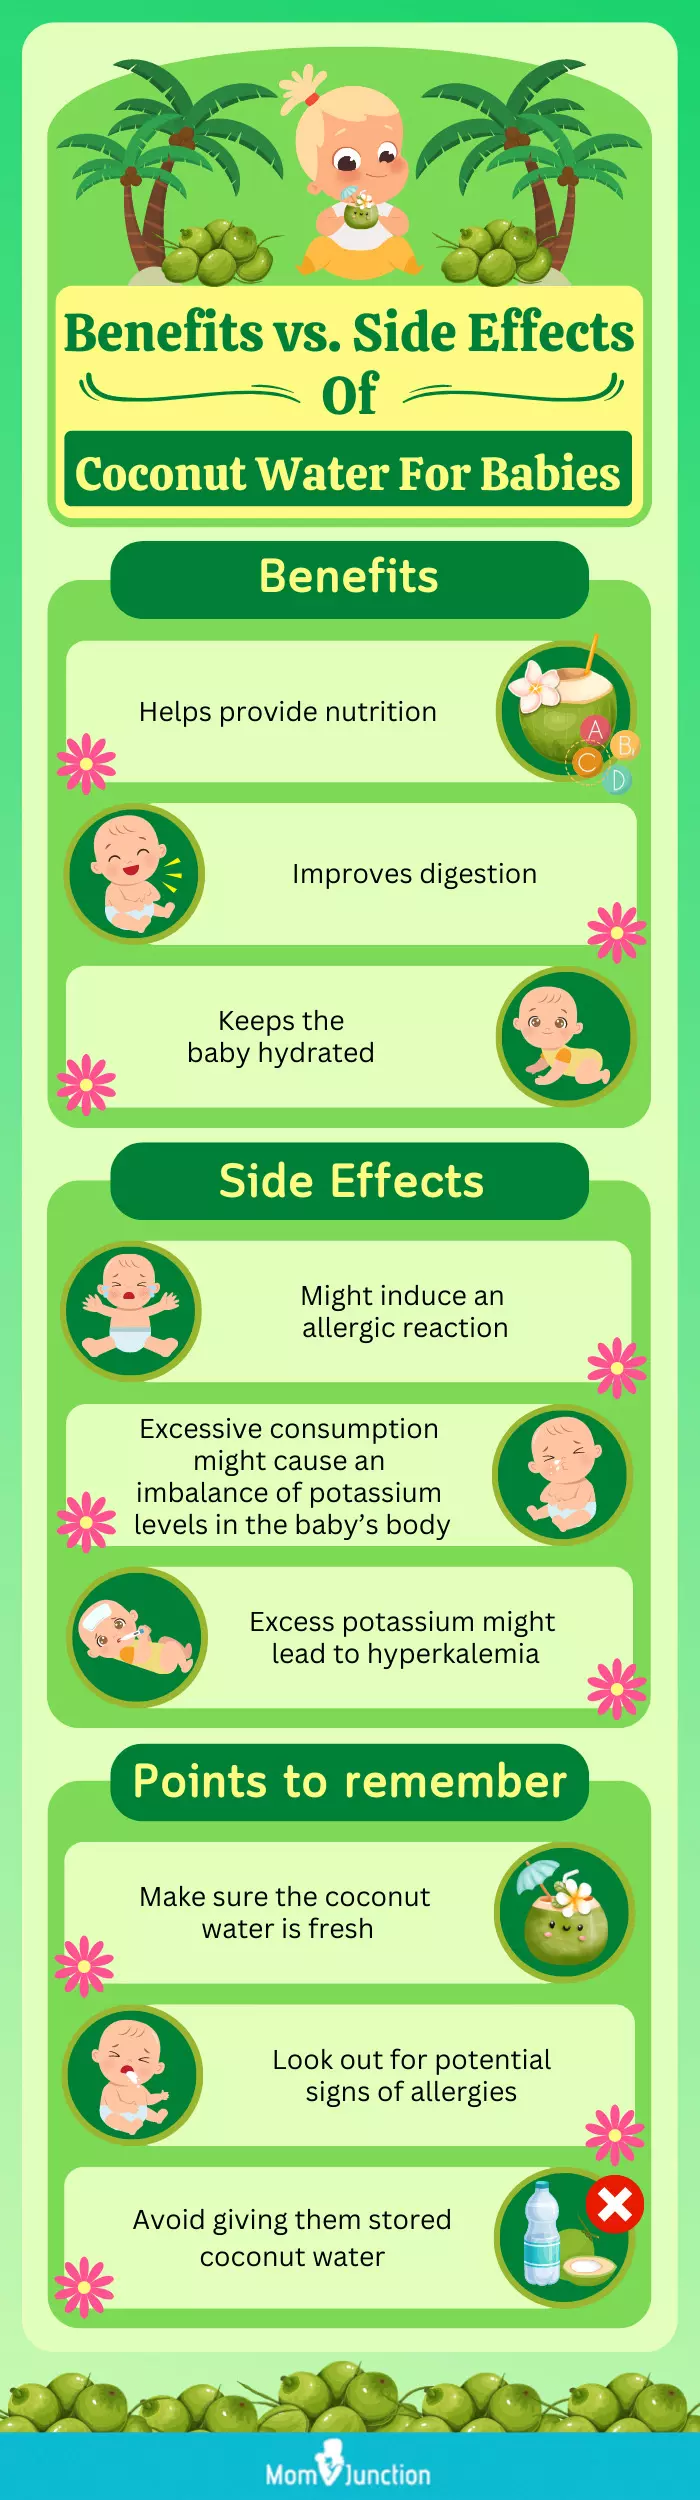 benefits vs side effects of cocnut water for babies (infographic)